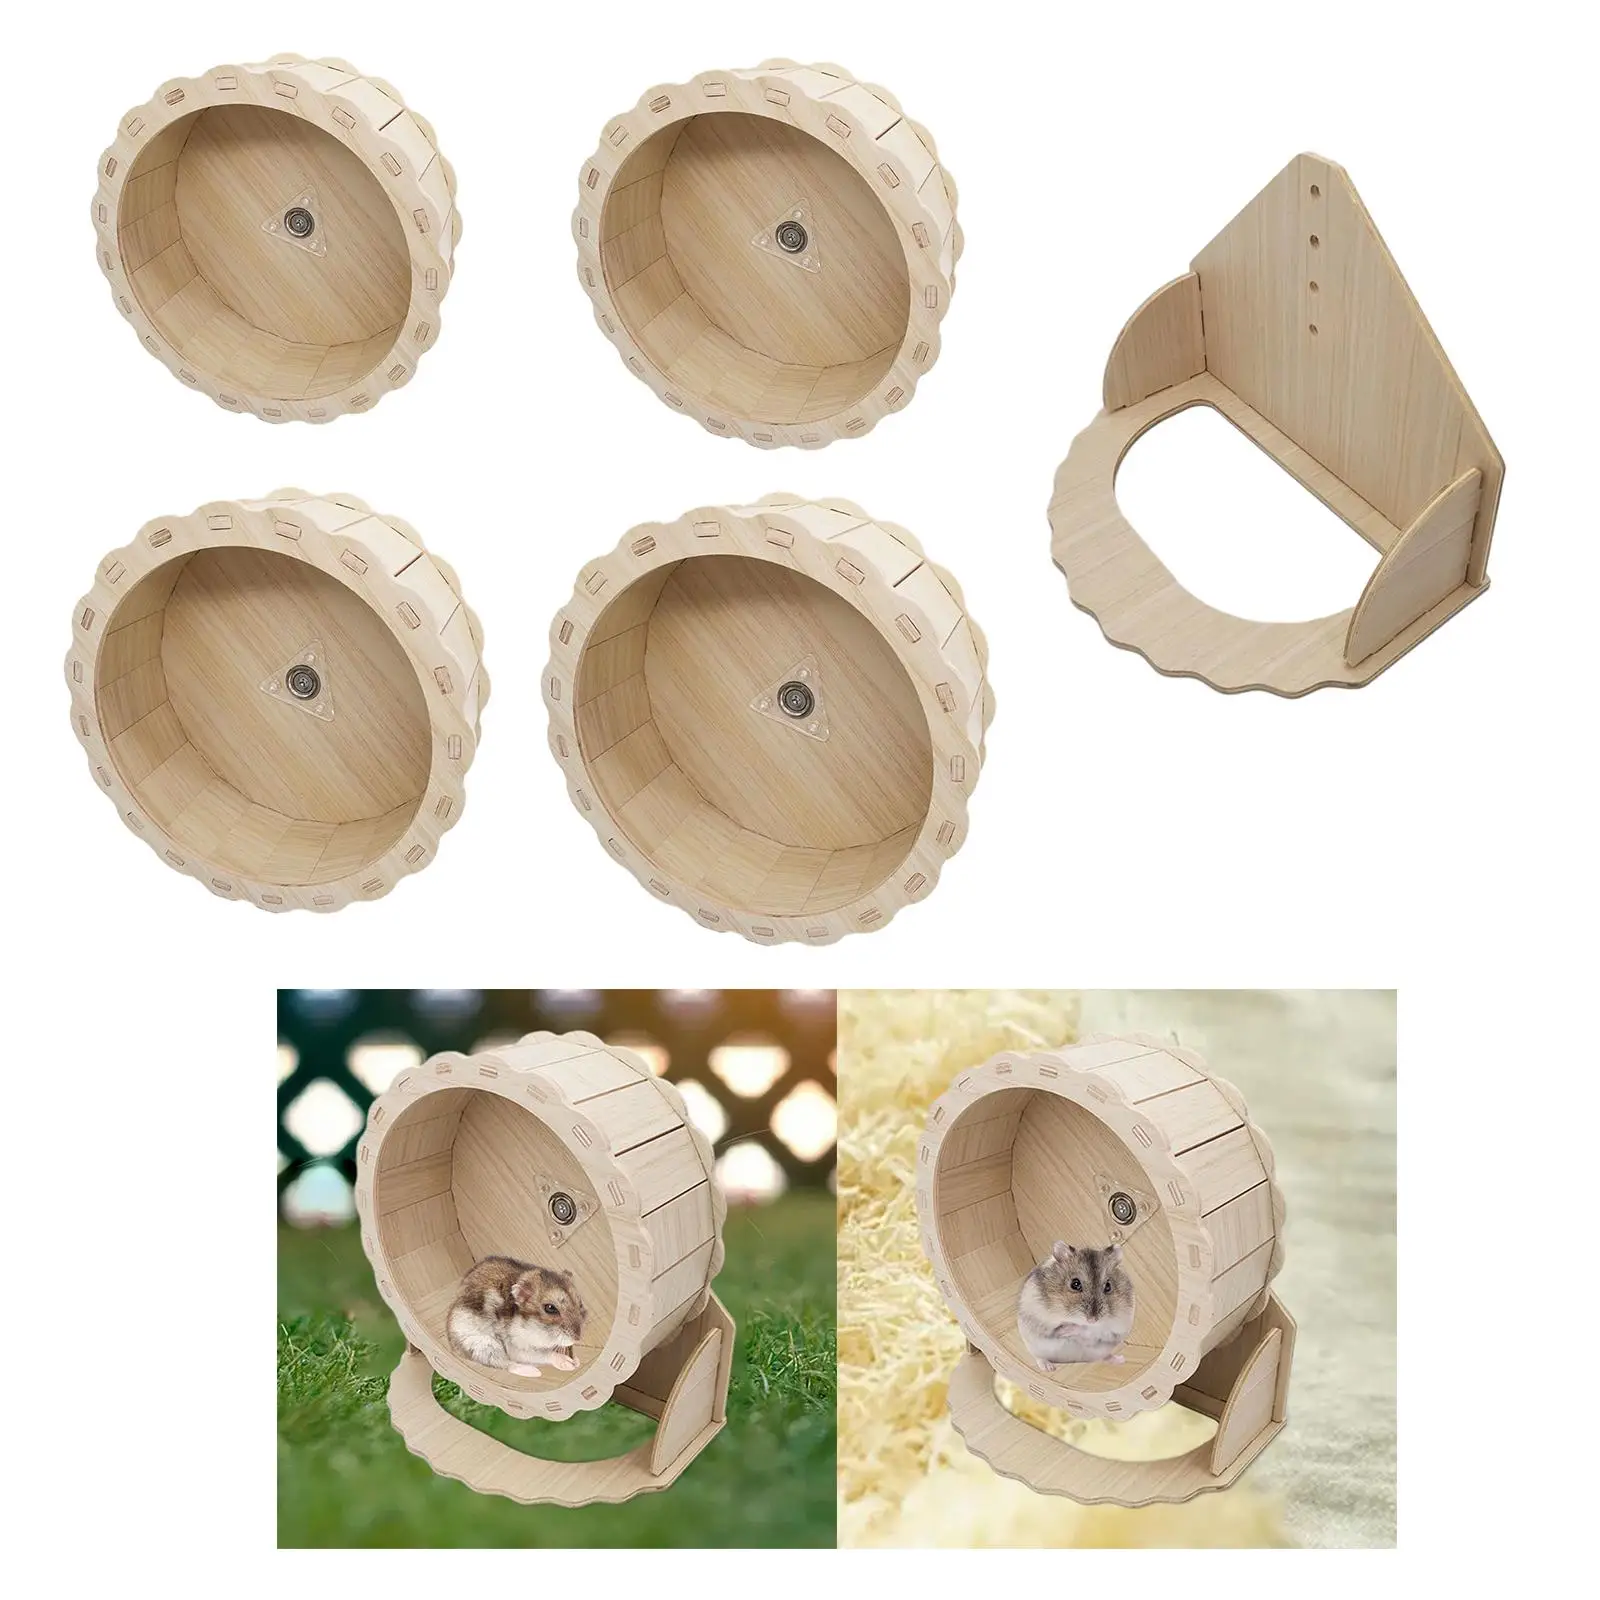 Hamster Wooden Running Wheel Fitness Toys Exercise Wheel Hamster Treadmill Quiet Pet Supplies for Mice Chinchilla Hedgehog